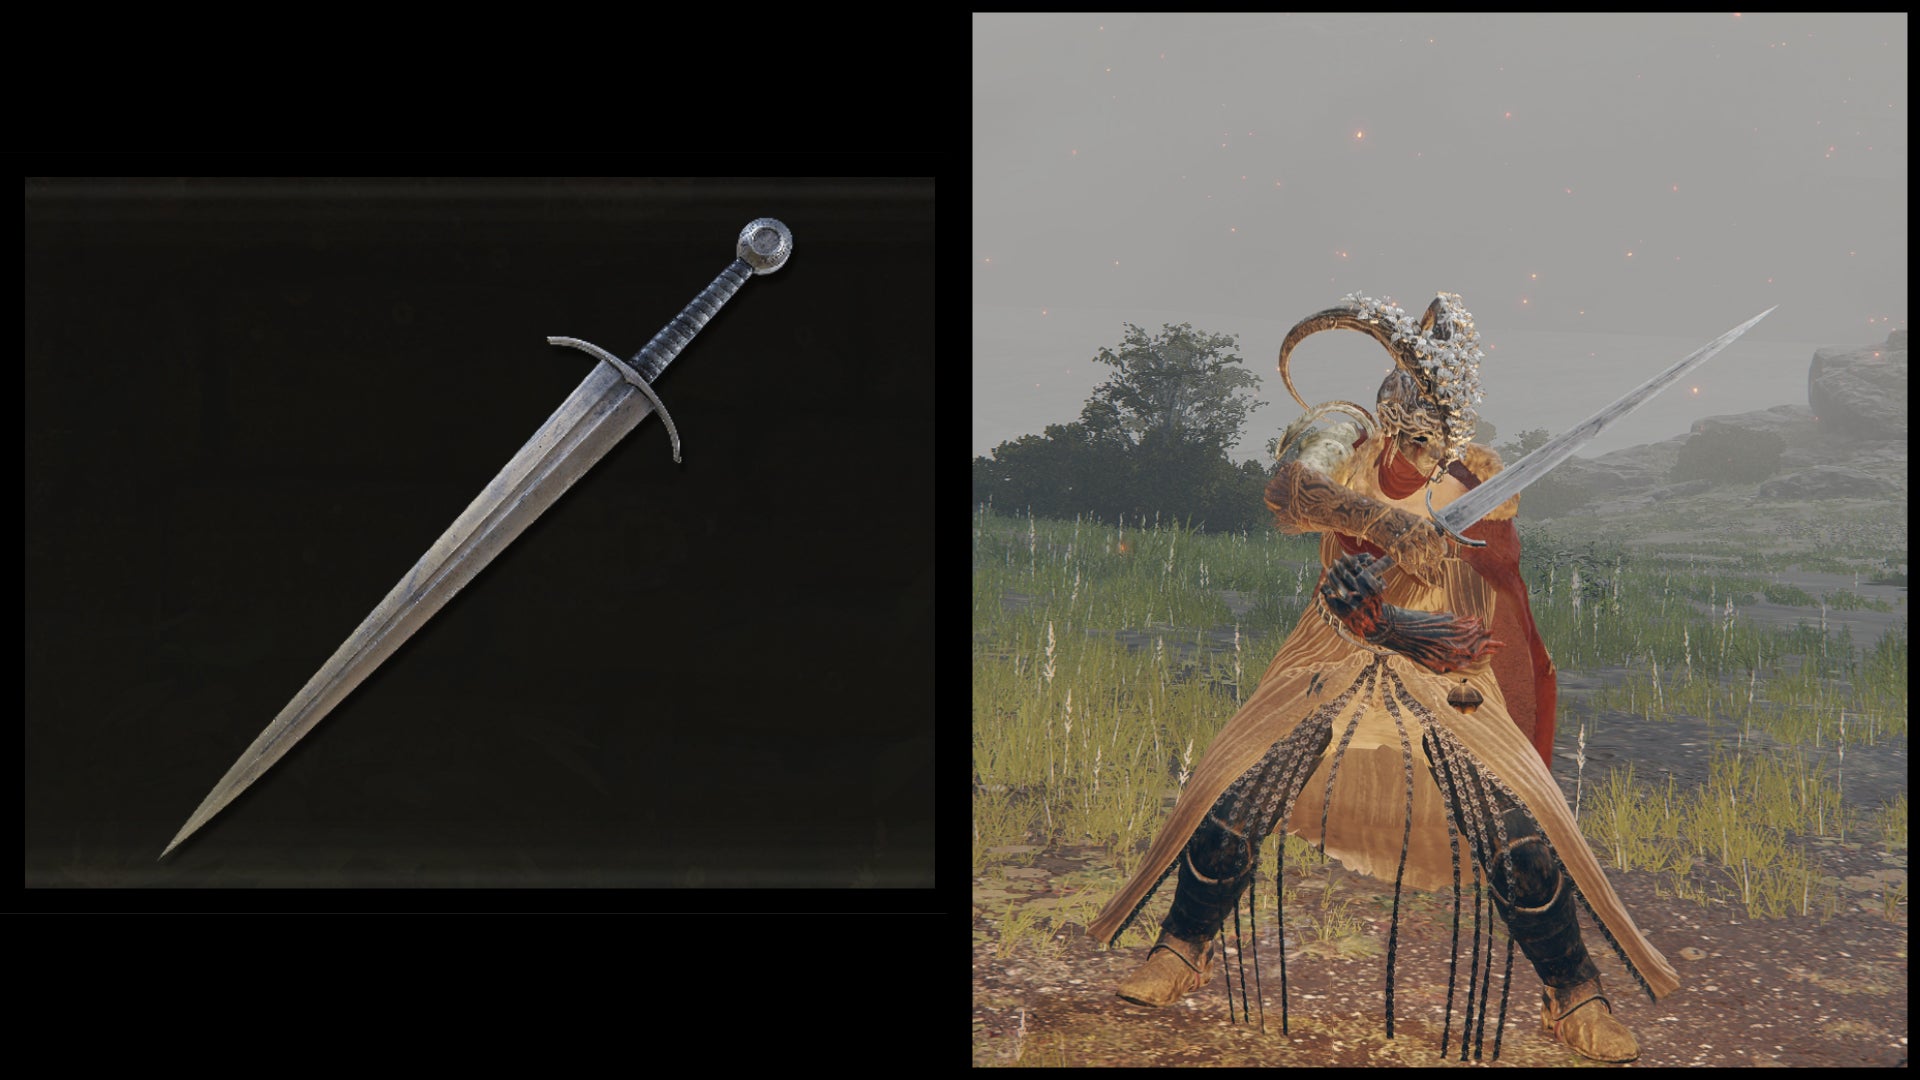 Left: an illustration of the Broadsword from Elden Ring. Right: the player character holding the same weapon against a Limgrave background.